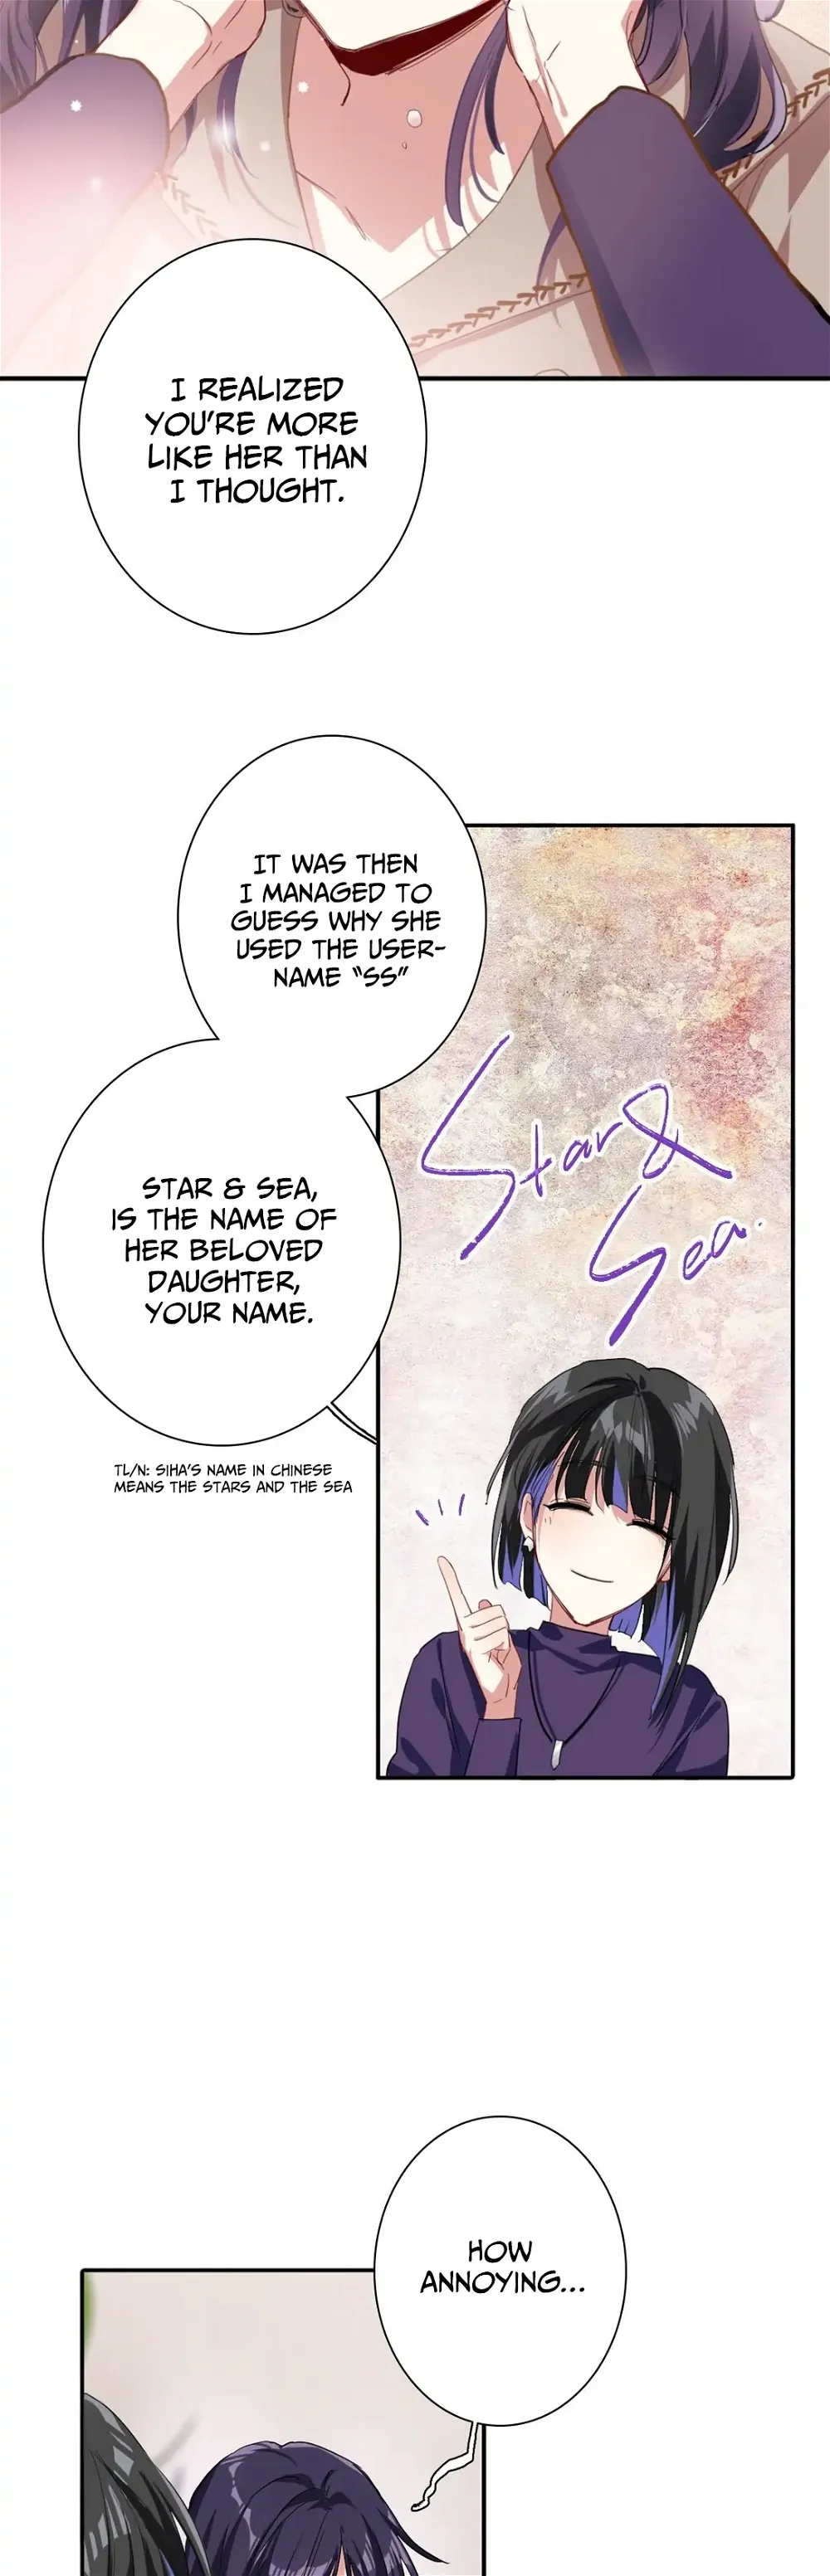 Star Dream Idol Project Chapter 295 - Page 14